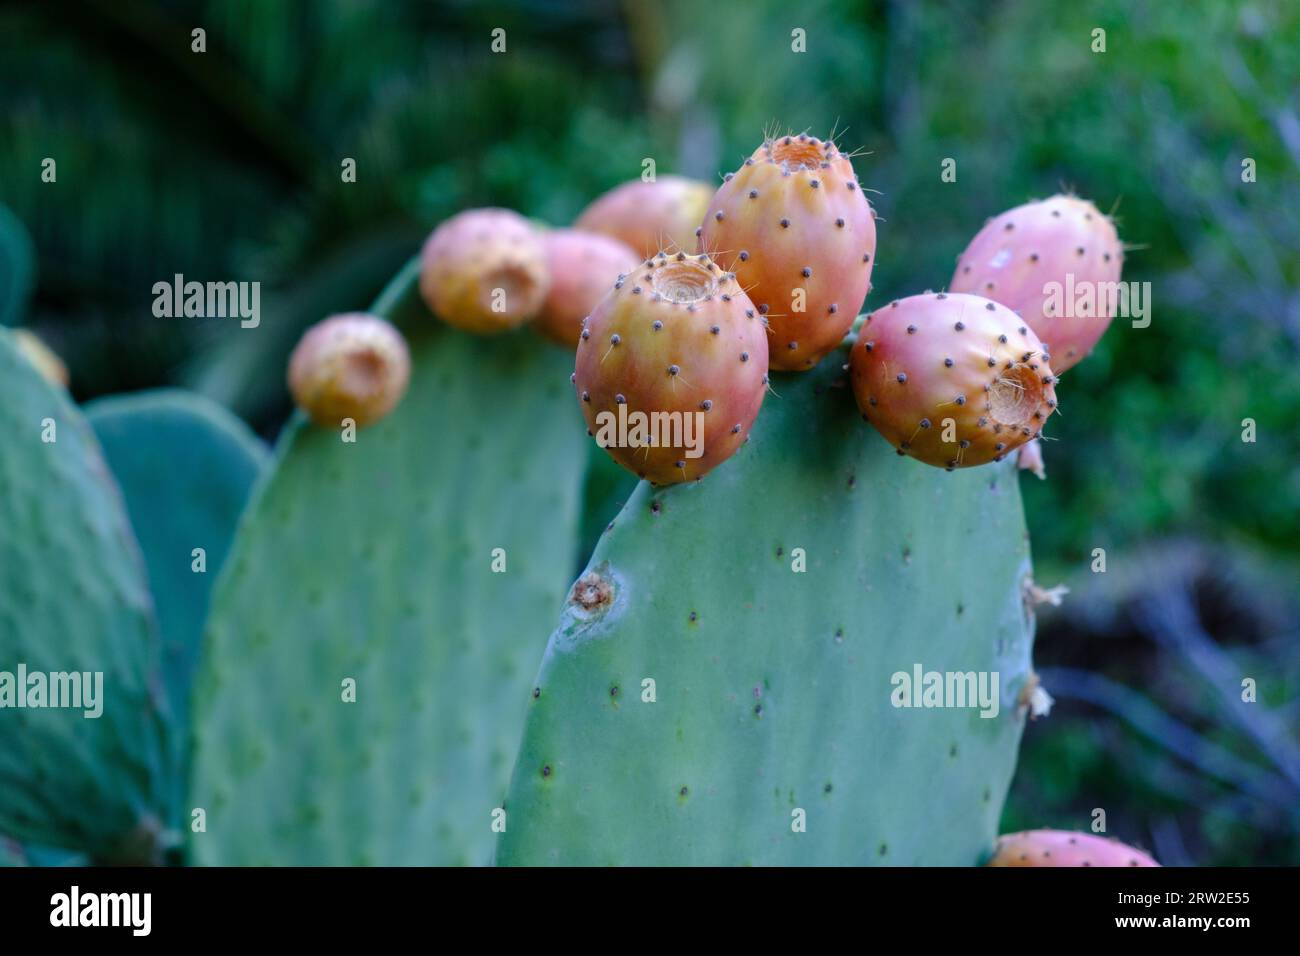 Ripe prickly pear fruit on the plant Stock Photo